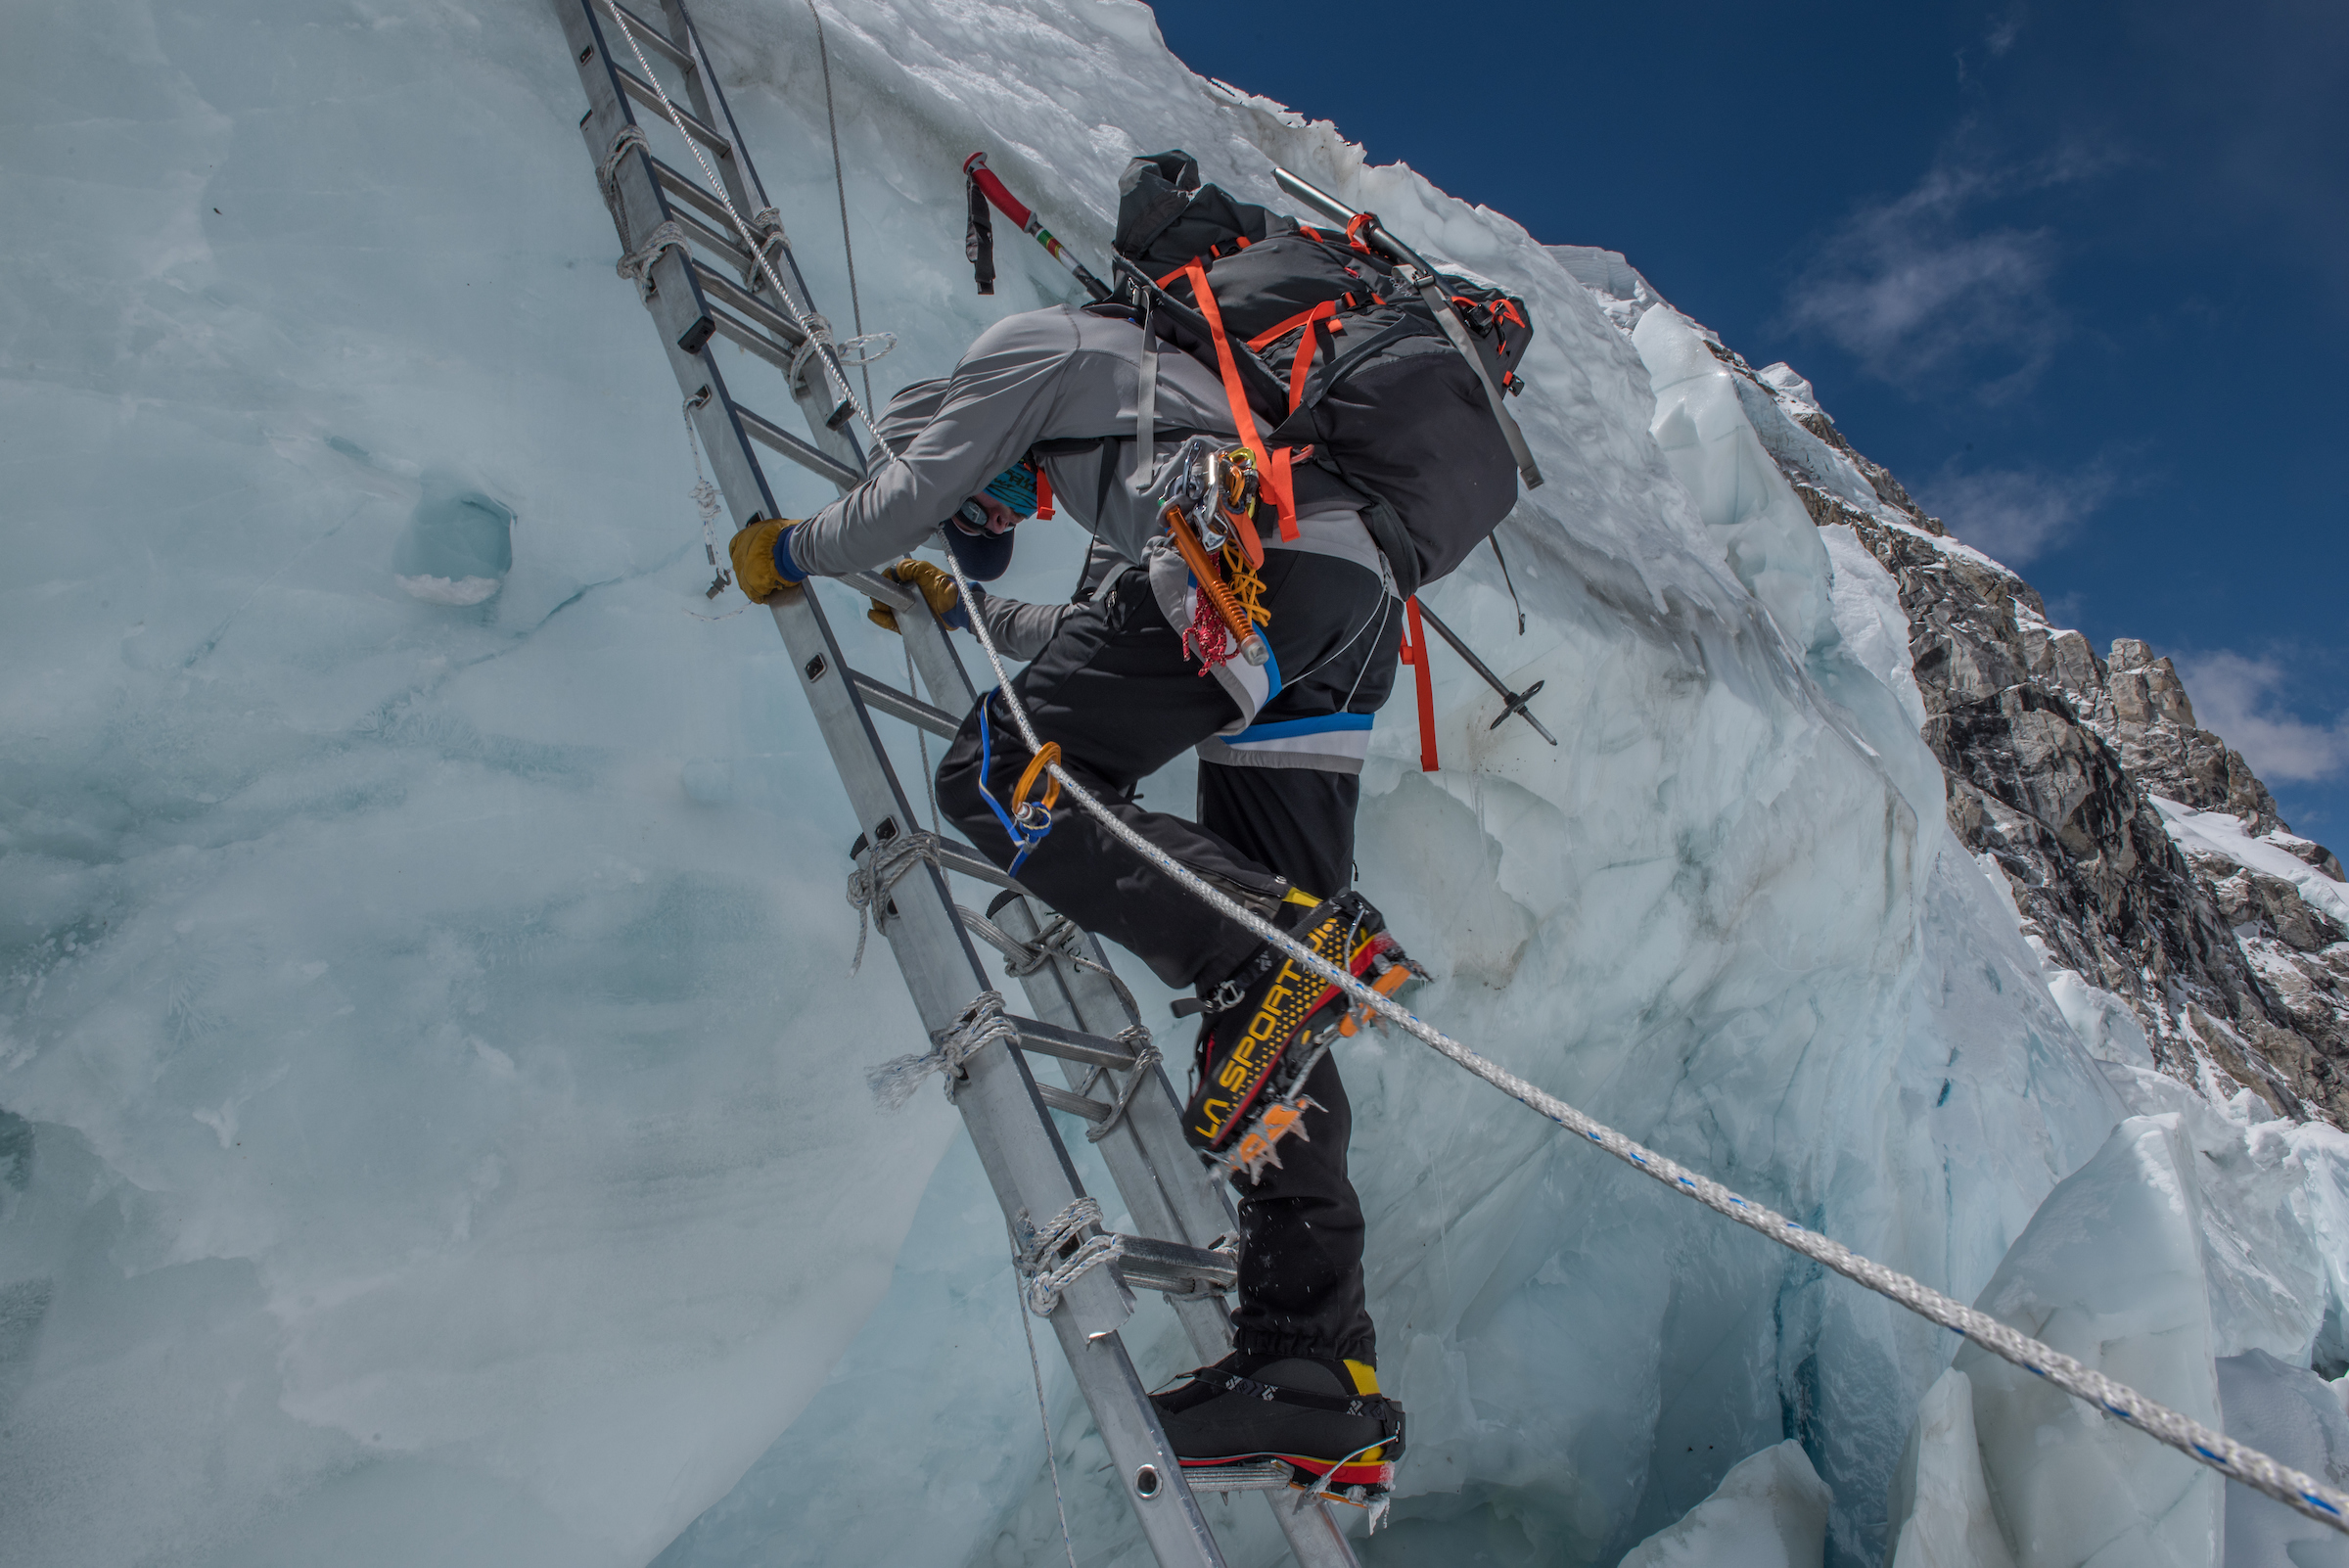 A man climbing up a ladder on a bergschrund. He is attached to a rope with full winter mountaineering gear including a backpack, ice axe, ice screws, etc.